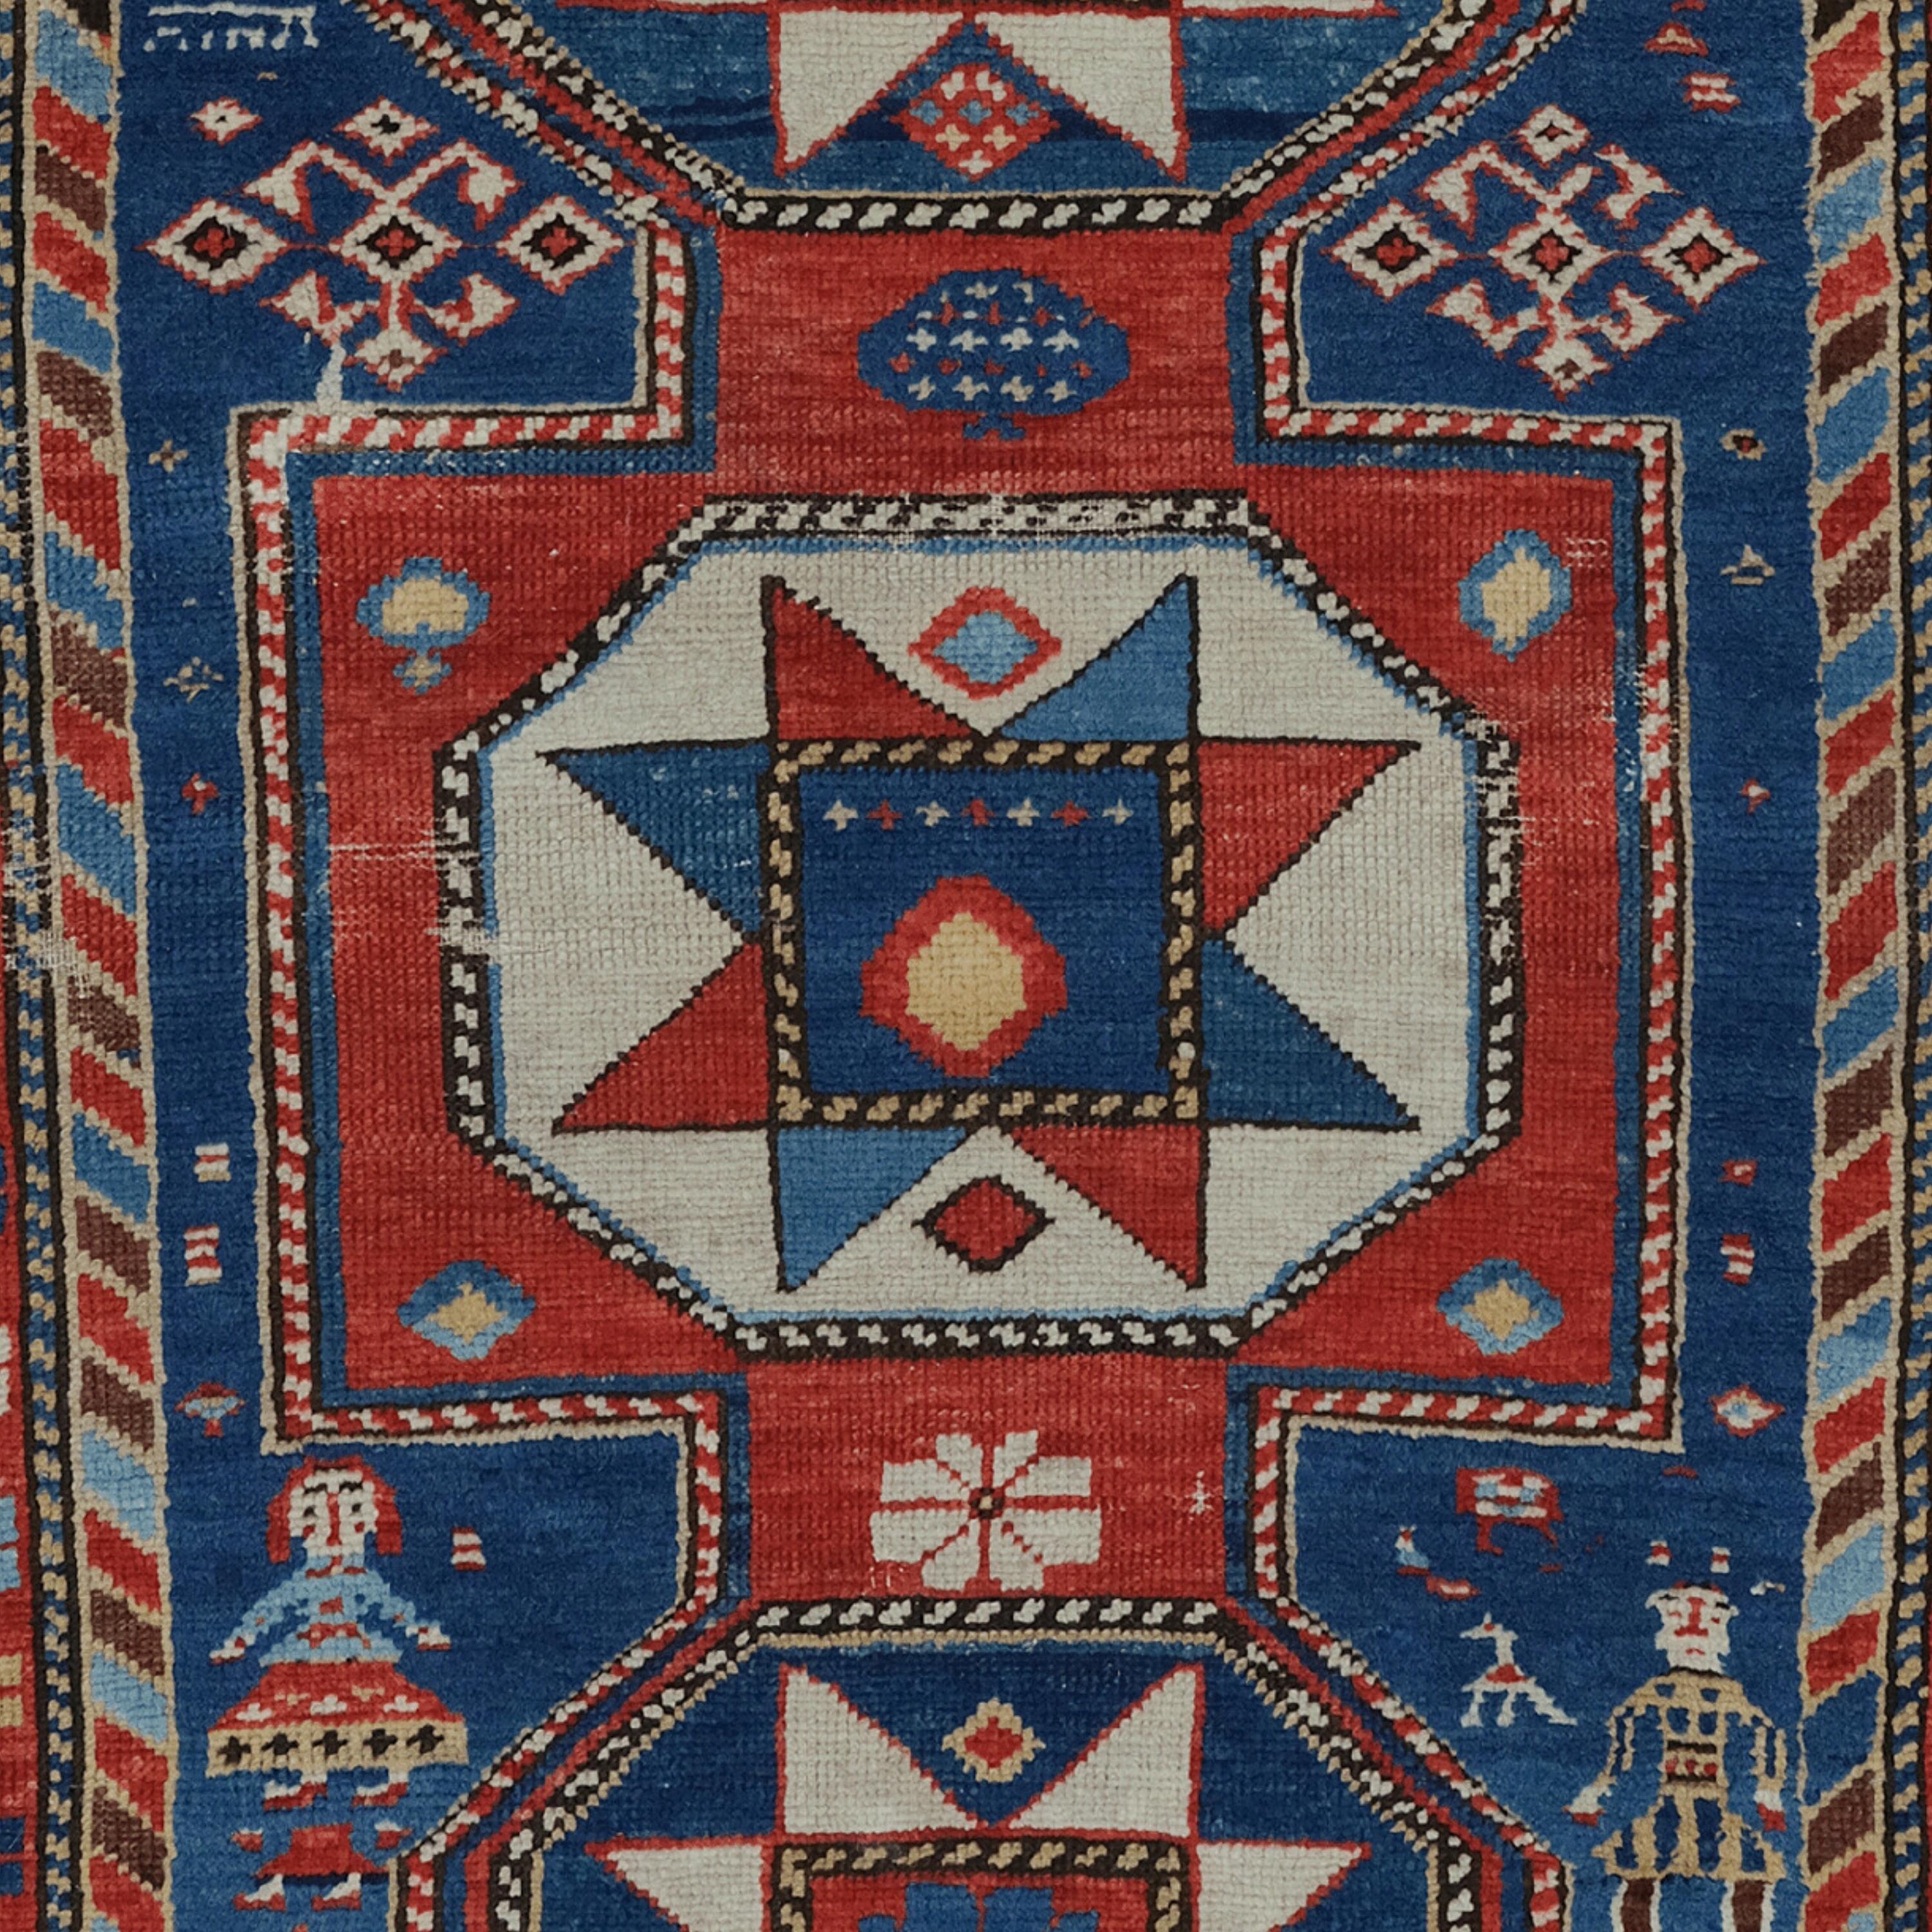 Middle of the 19th Century Shirvan Lezgi Rug, Antique Rug, Caucasian Rug In Good Condition For Sale In Sultanahmet, 34